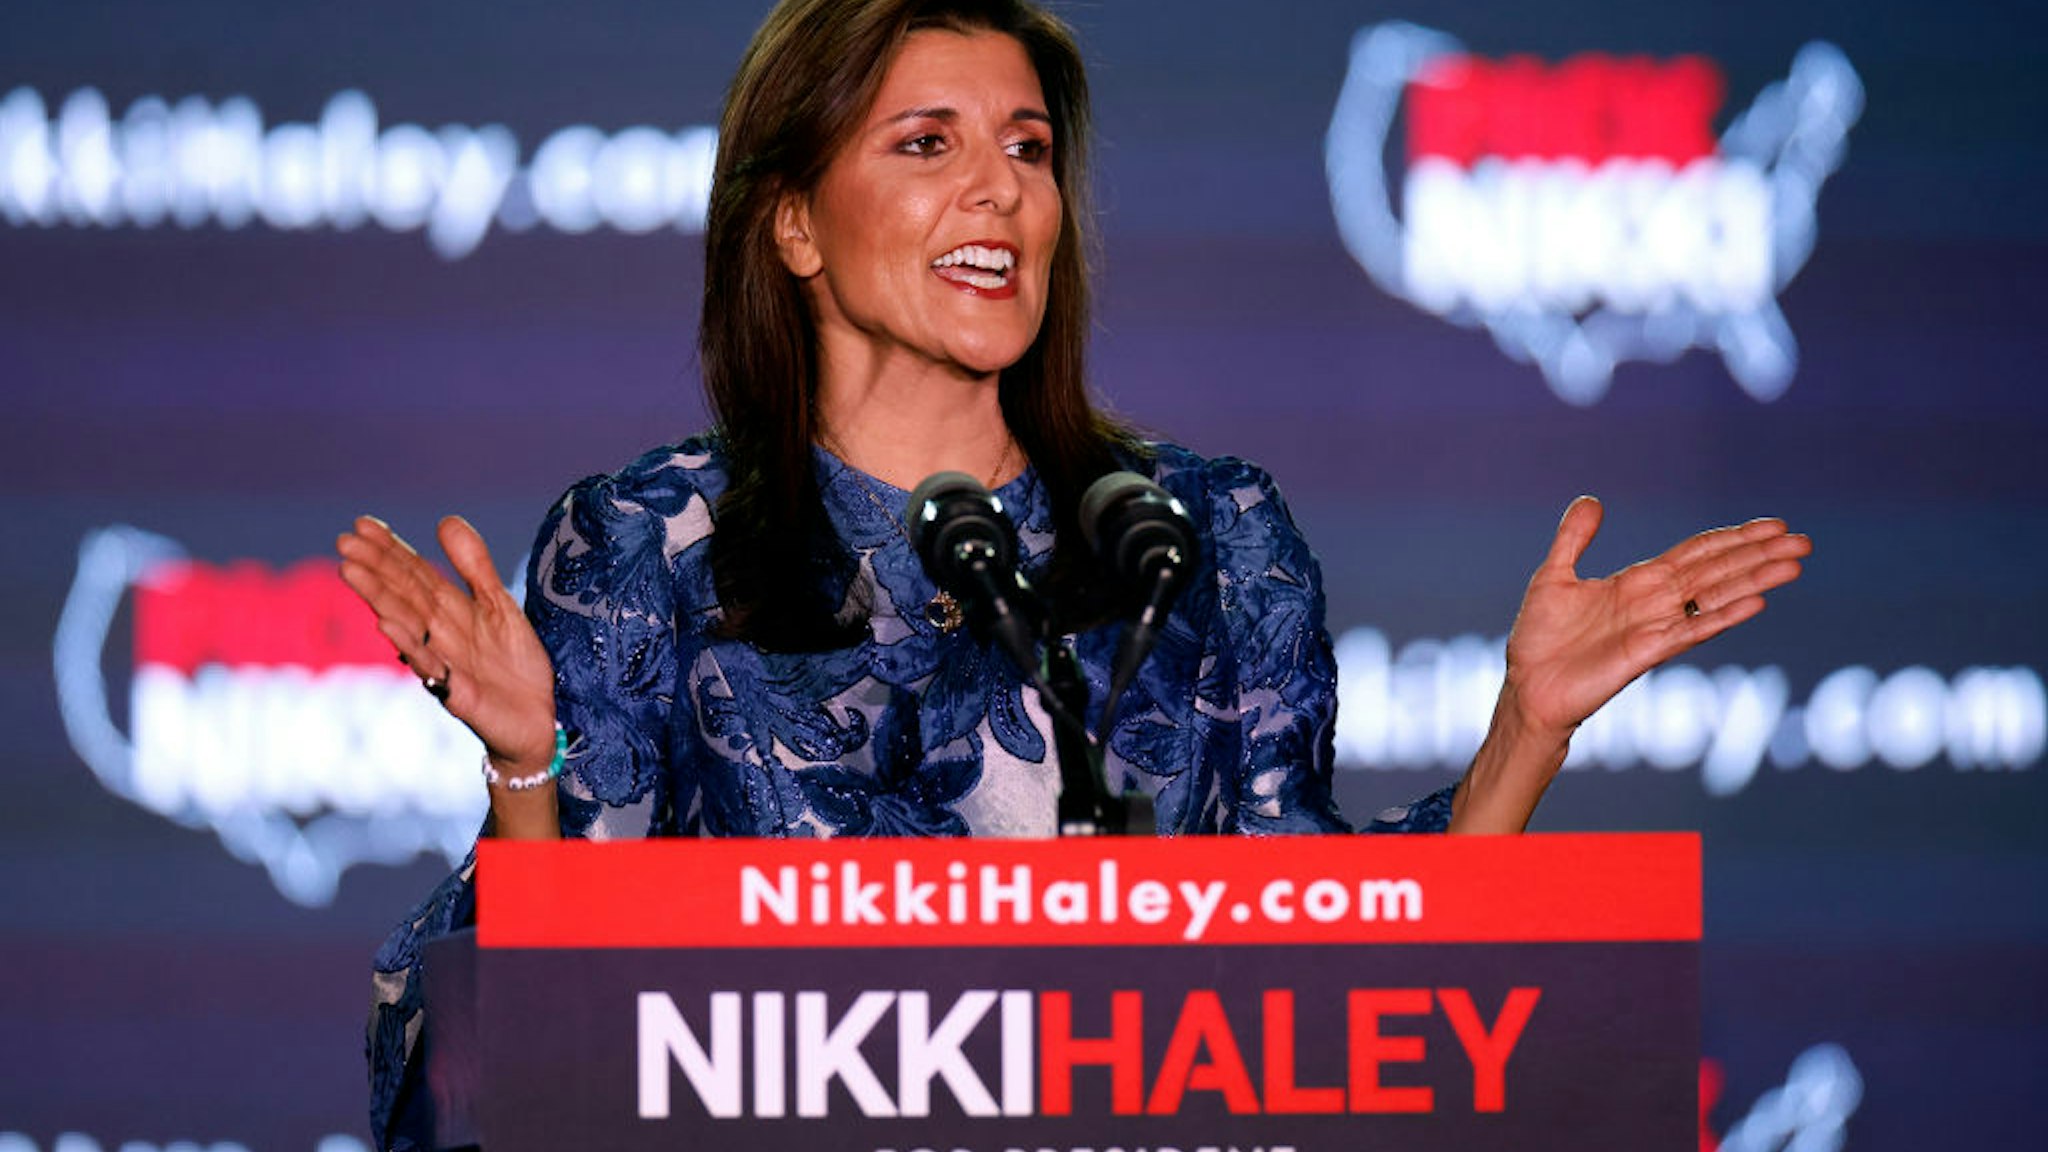 CONCORD, NEW HAMPSHIRE - JANUARY 23: Republican presidential candidate former U.N. Ambassador Nikki Haley delivers remarks at her primary night rally at the Grappone Conference Center on January 23, 2024 in Concord, New Hampshire. New Hampshire voters cast their ballots in their state's primary election today. With Florida Governor Ron DeSantis dropping out of the race Sunday, former President Donald Trump and former UN Ambassador Nikki Haley are battling it out in this first-in-the-nation primary. (Photo by Tasos Katopodis/Getty Images)